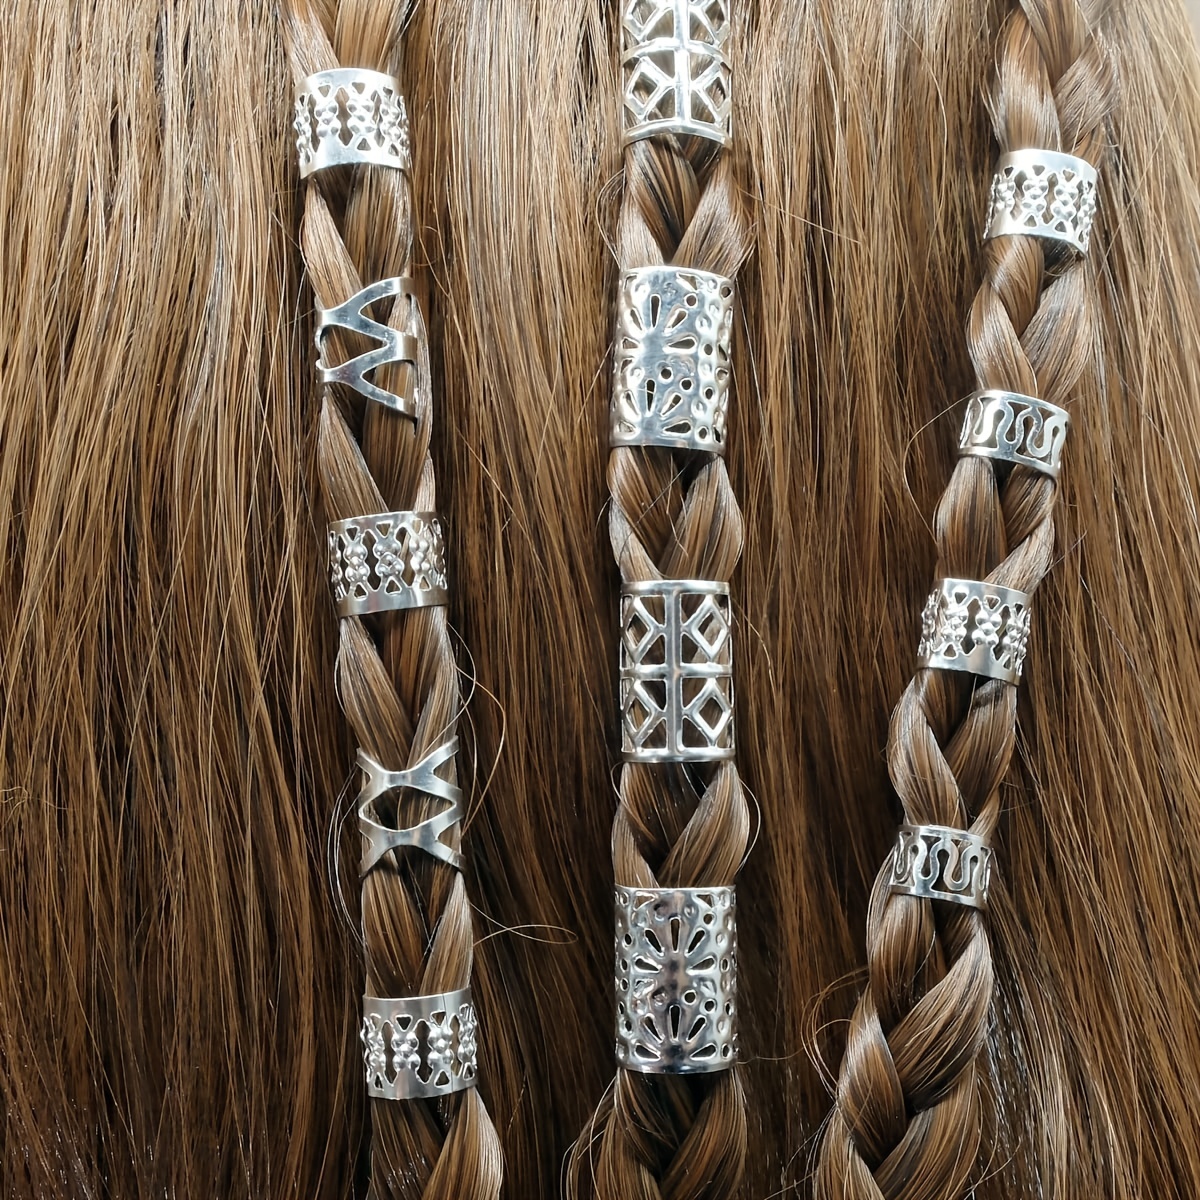 100 PCS Silver Hair Jewelry for Braids Loc Jewelry for Hair Accessories  Hair Cuffs for Braids Dreadlock Beads for Women